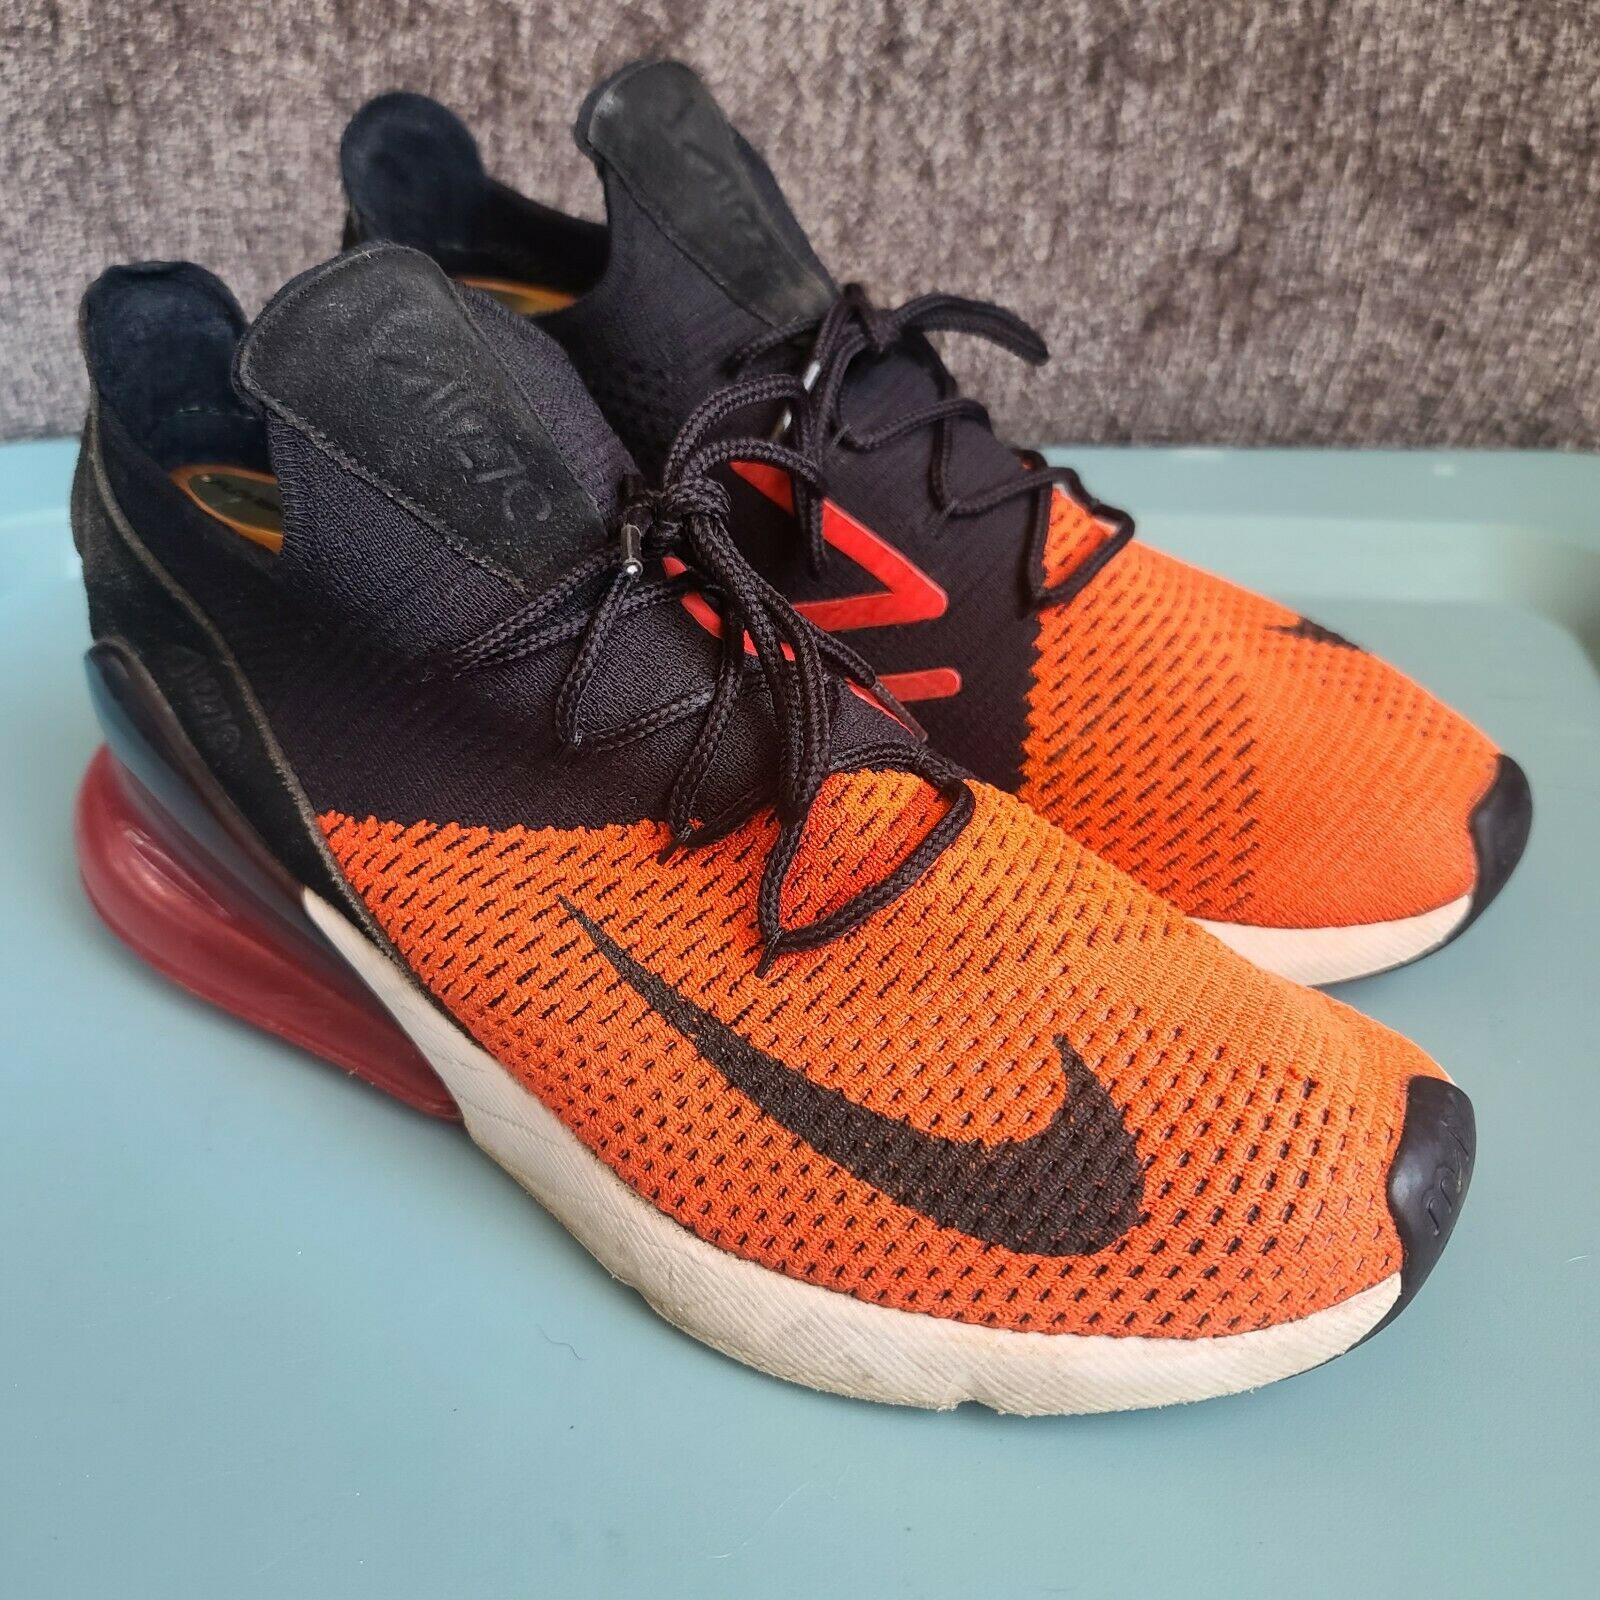 Nike Men's Air Max 270 Flyknit 'Bred' Sneakers Size 11 Red Lace Up Shoes